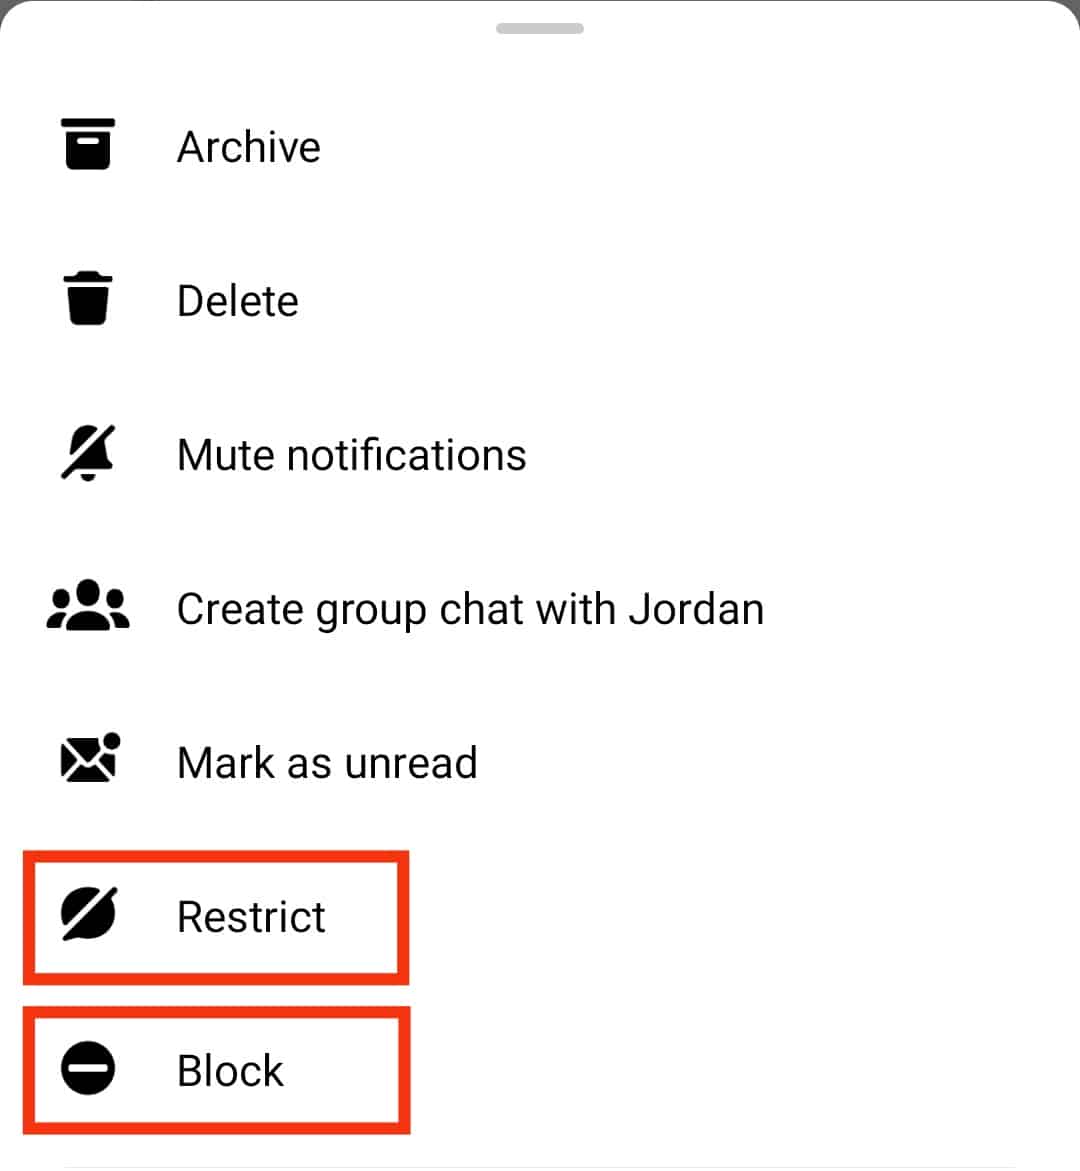 Select Either Restrict Or Block